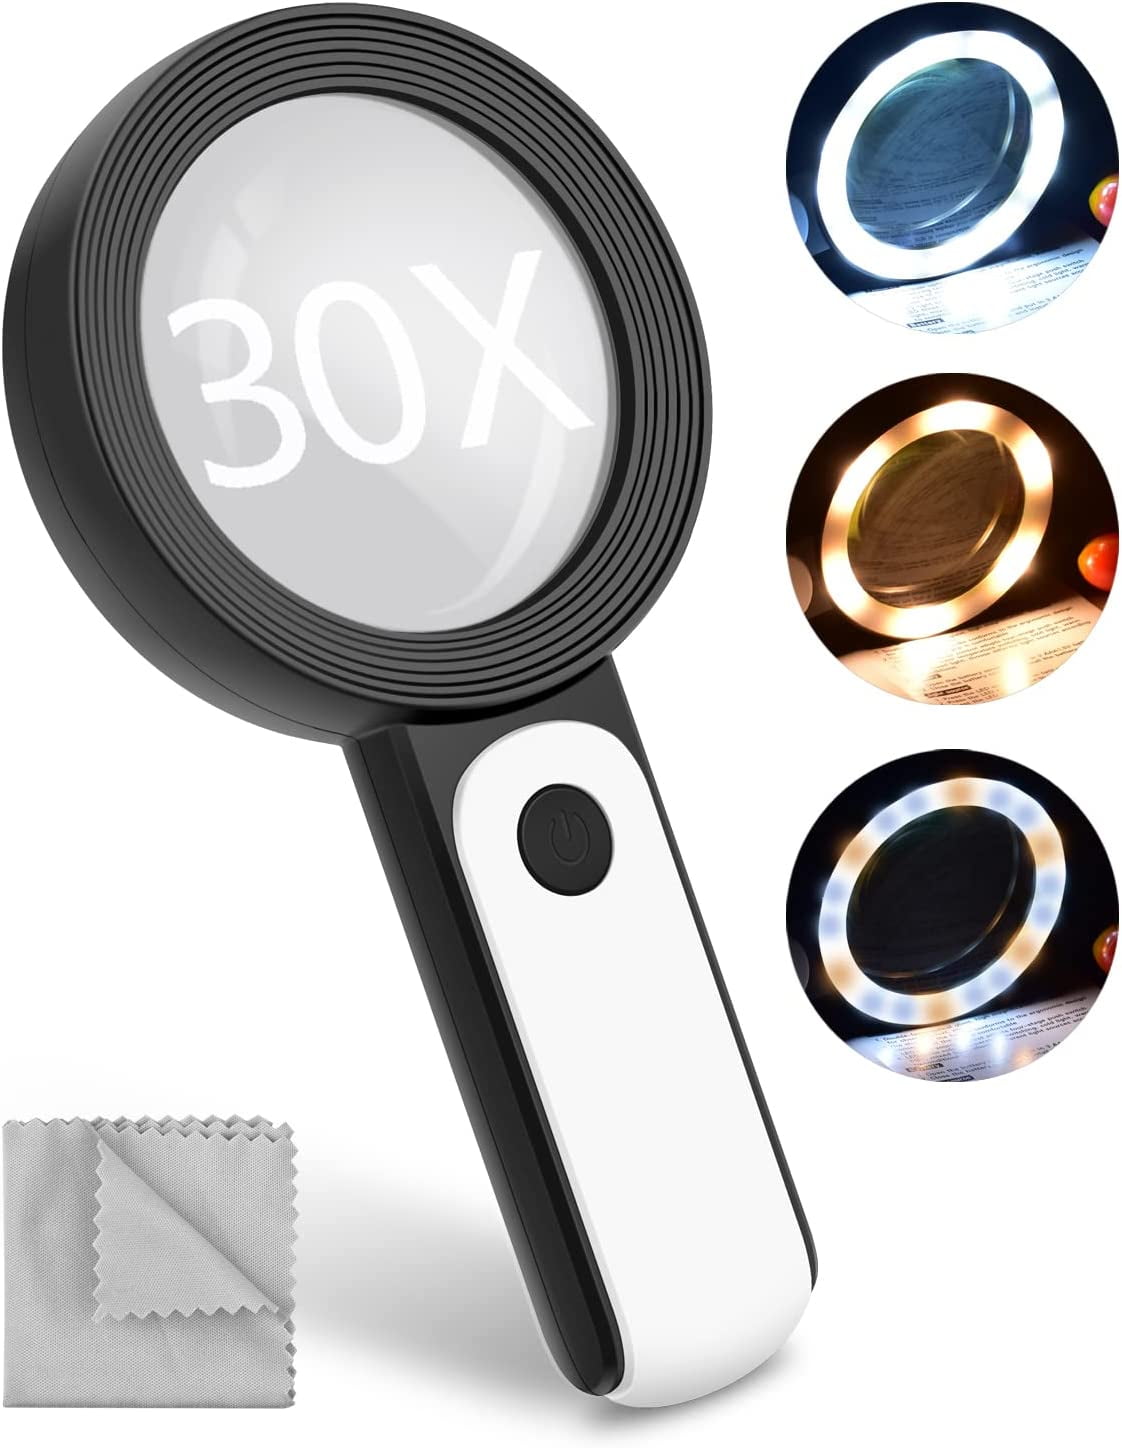 FREE Shipping Big Magnifier Jewelry Magnifying Glass W/ 3 Led Lamp